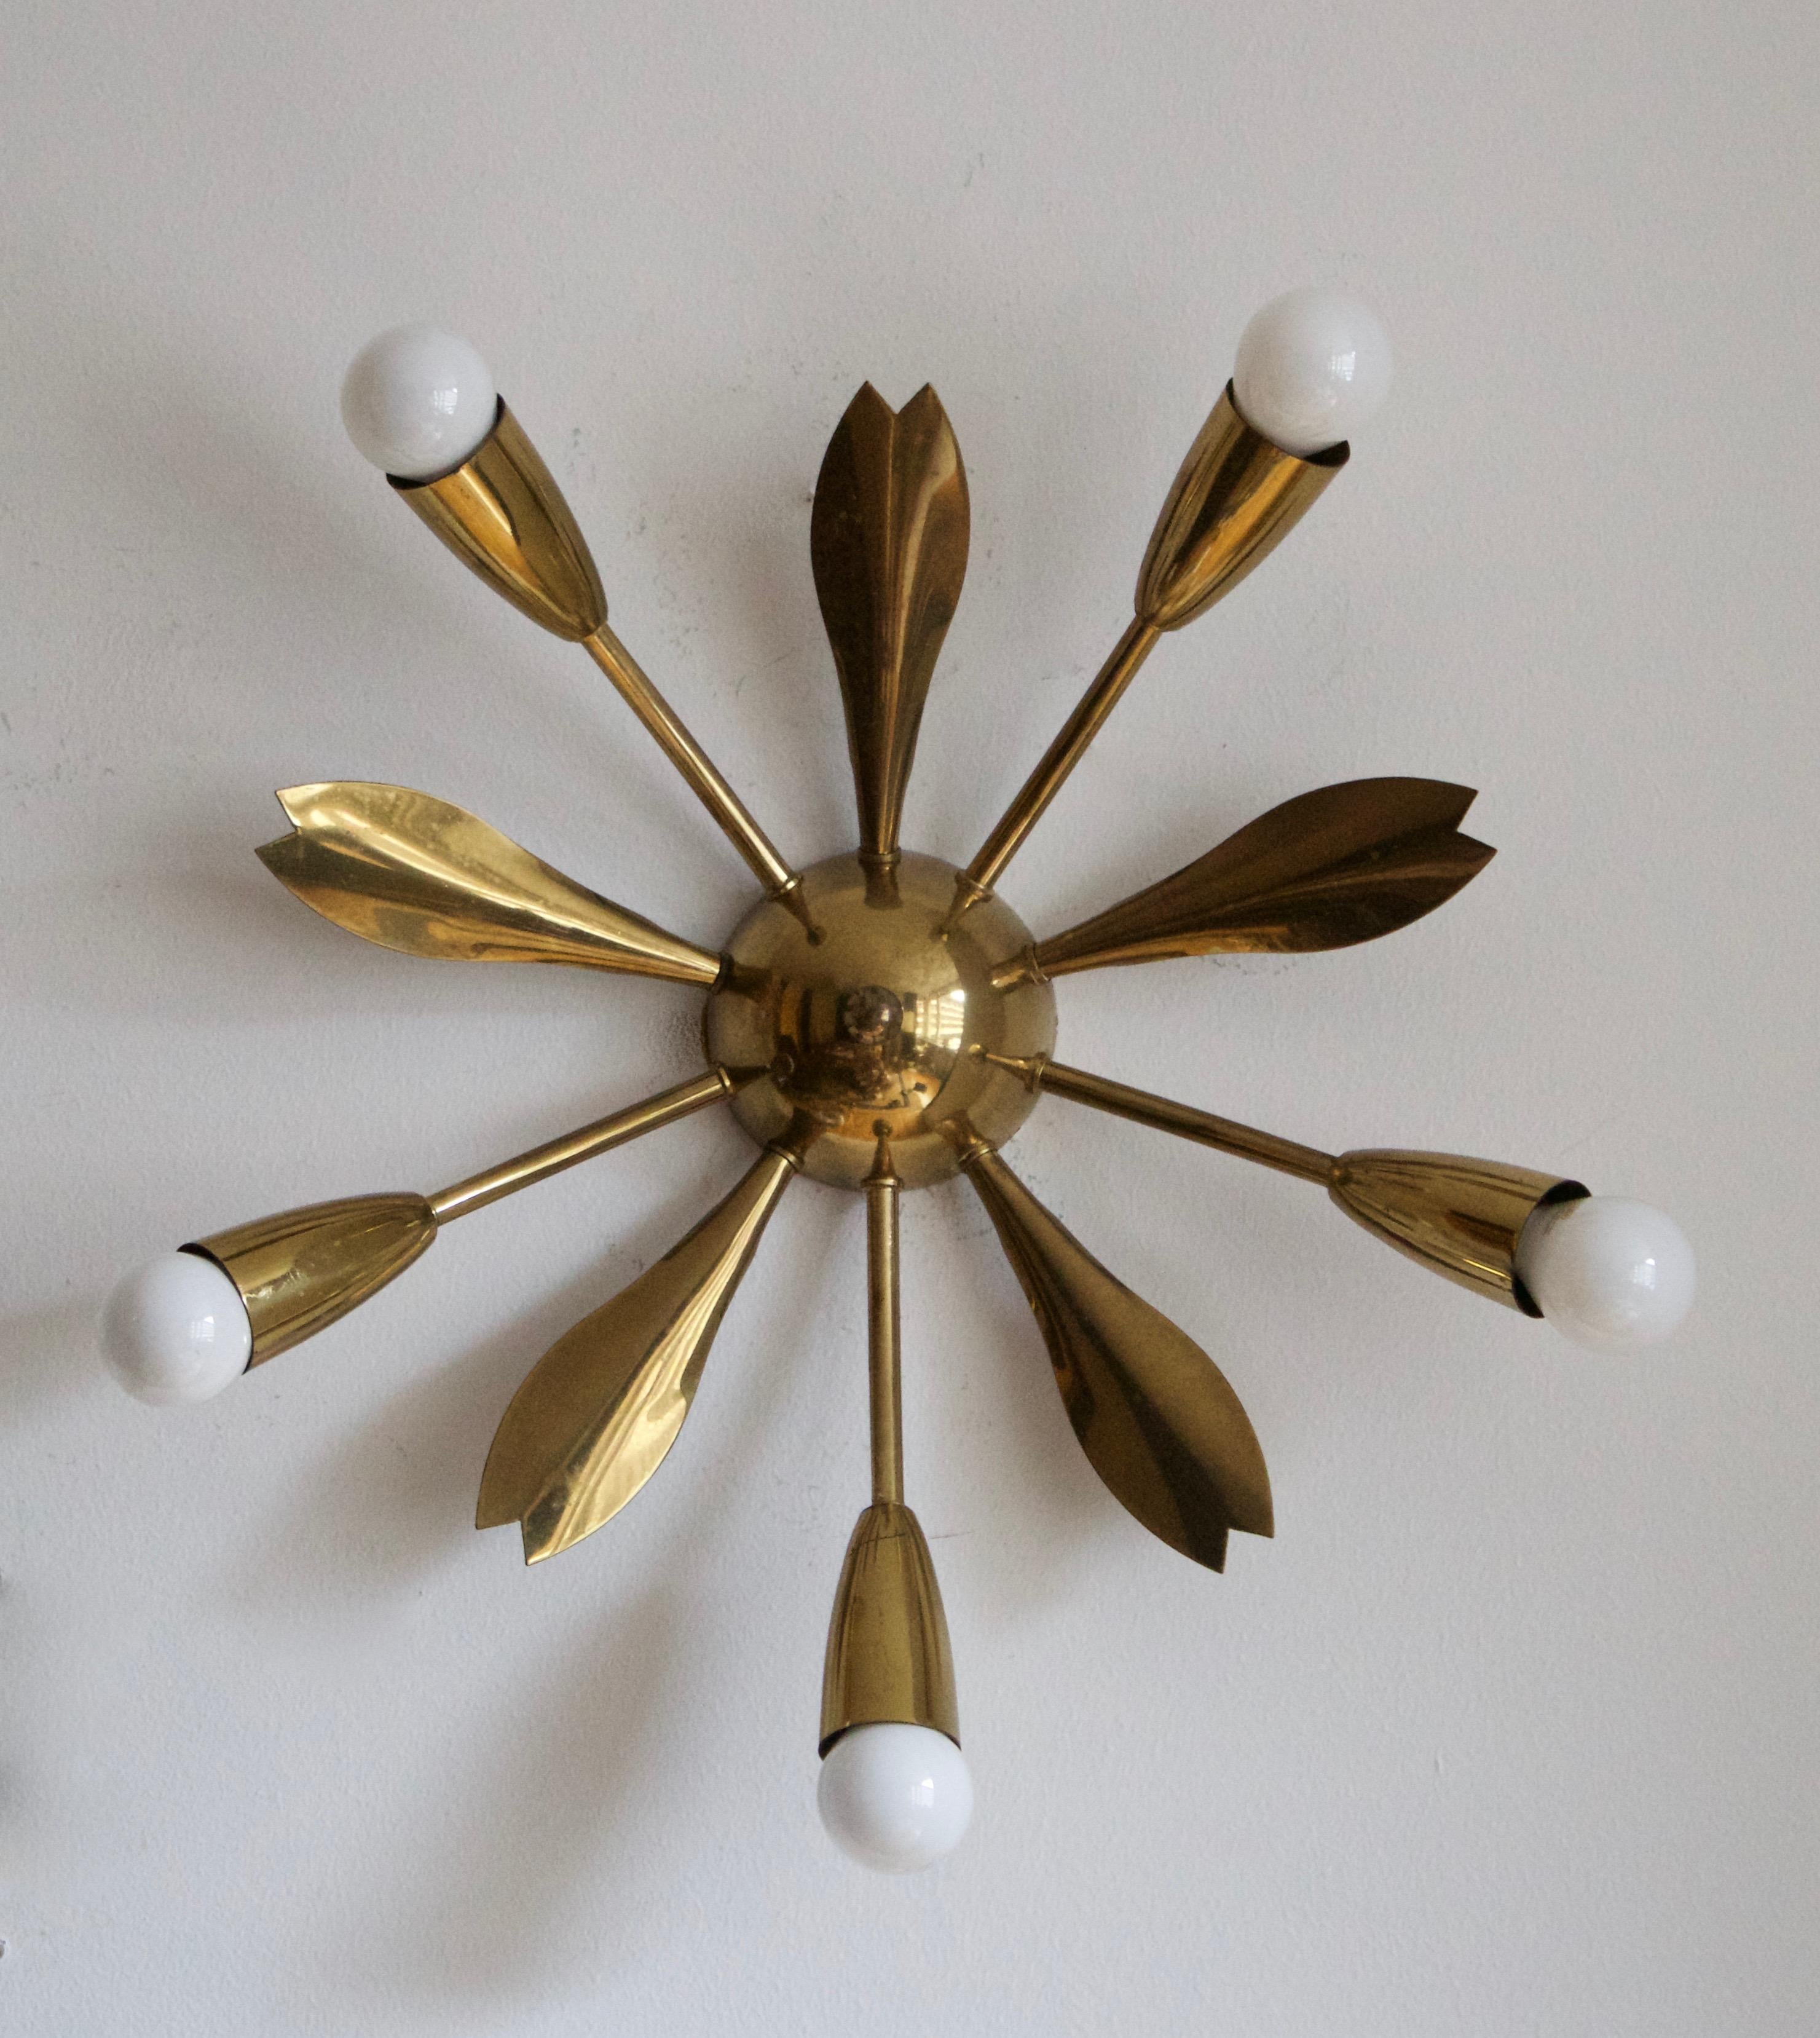 A two armed wall light. designed and produced in Sweden, 1950s. Can also function as flush mount ceiling light.

Stated dimensions with lightbulbs attached.